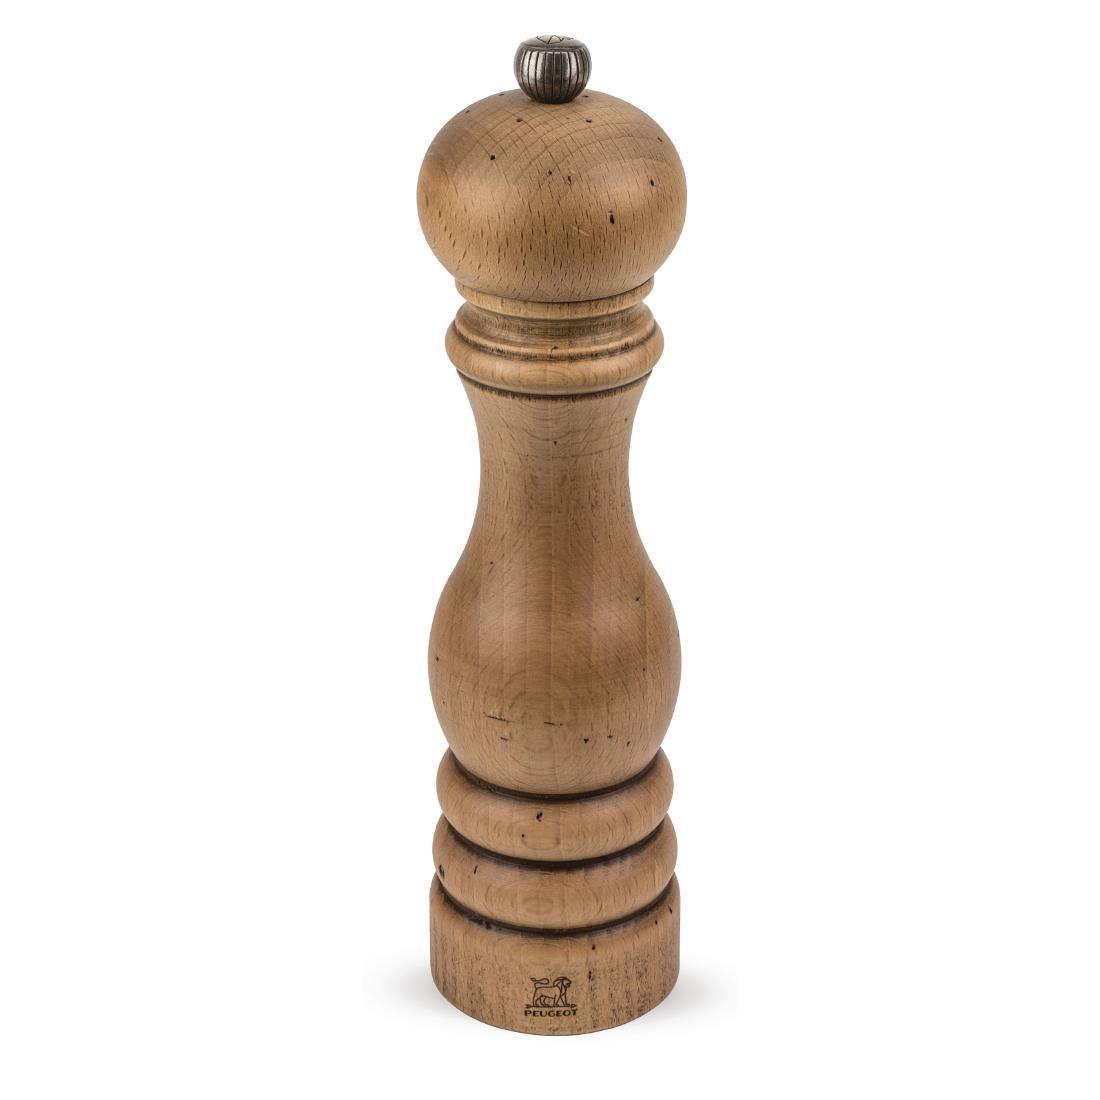 Peugeot Antique Wood Pepper Mill 9in - GN551  - 1